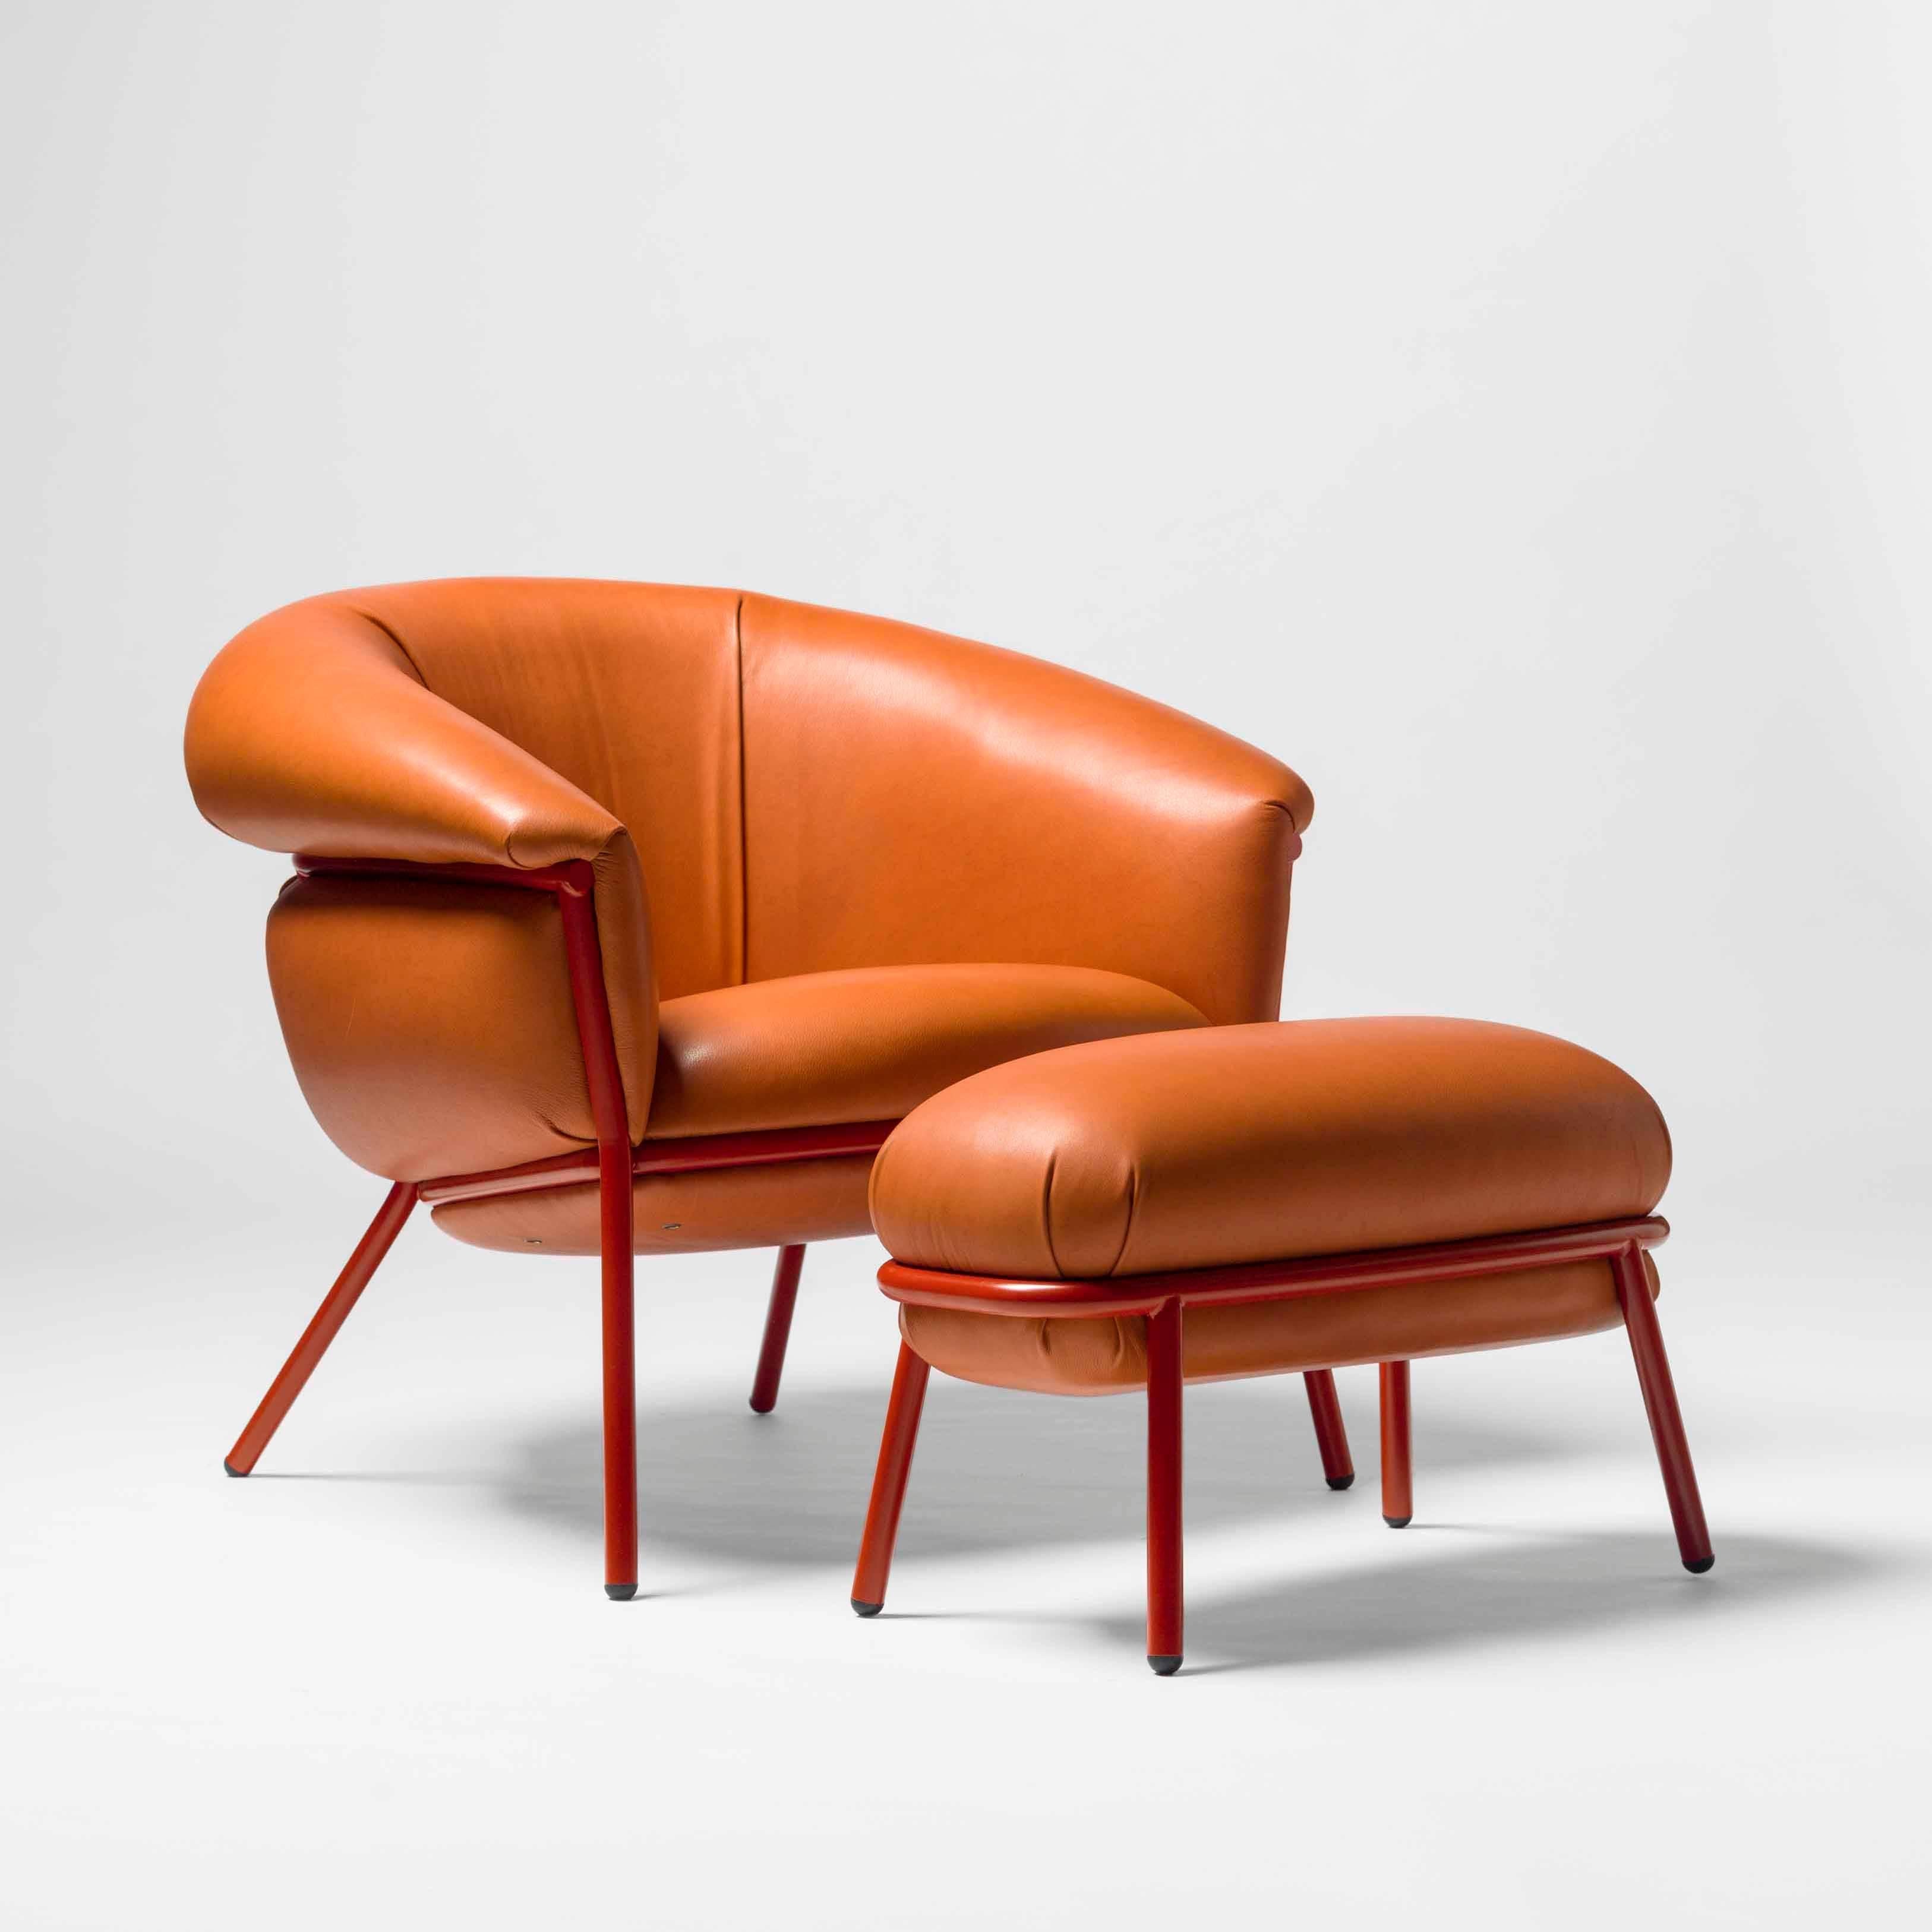 Contemporary Grasso Armchair by Stephen Burks, Orange for BD For Sale